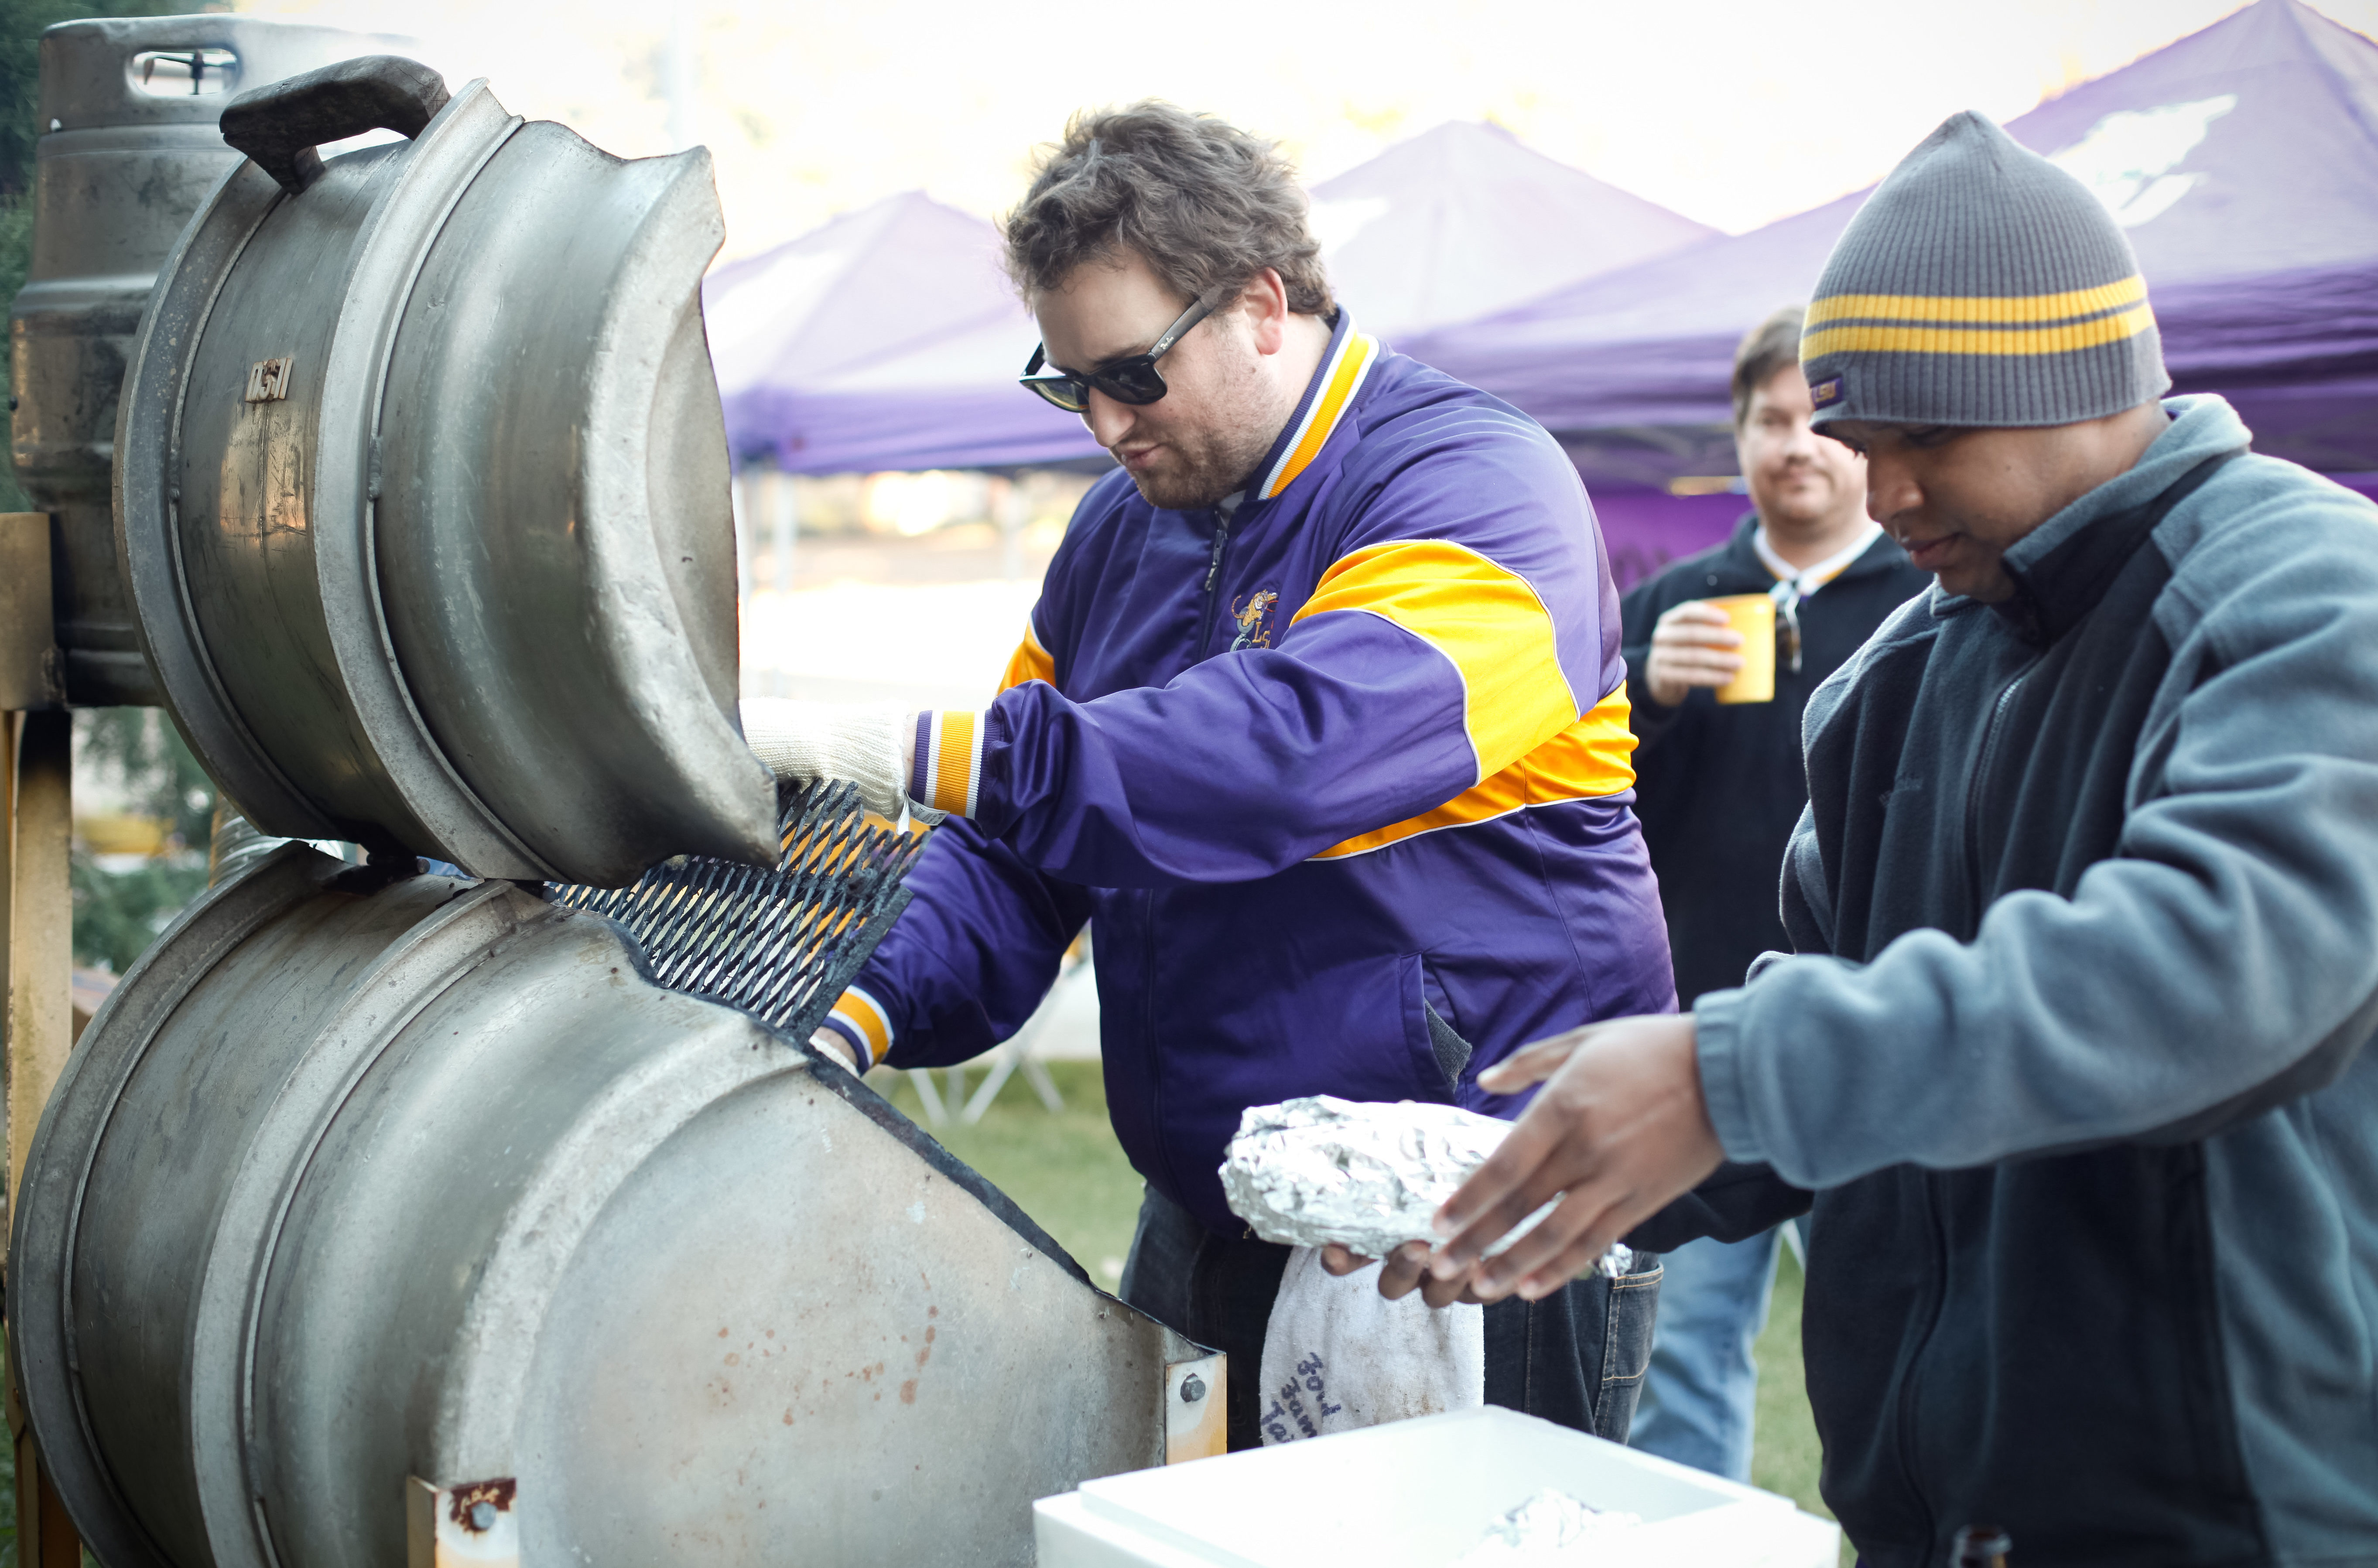 Hot Boudin And Cold Couscous Jay Ducote Talks Tailgate Traditions And New Additions Lsu pep rally perform hot boudin cheer. https www inregister com cuisine hot boudin cold couscous jay ducote talks tailgate traditions new additions